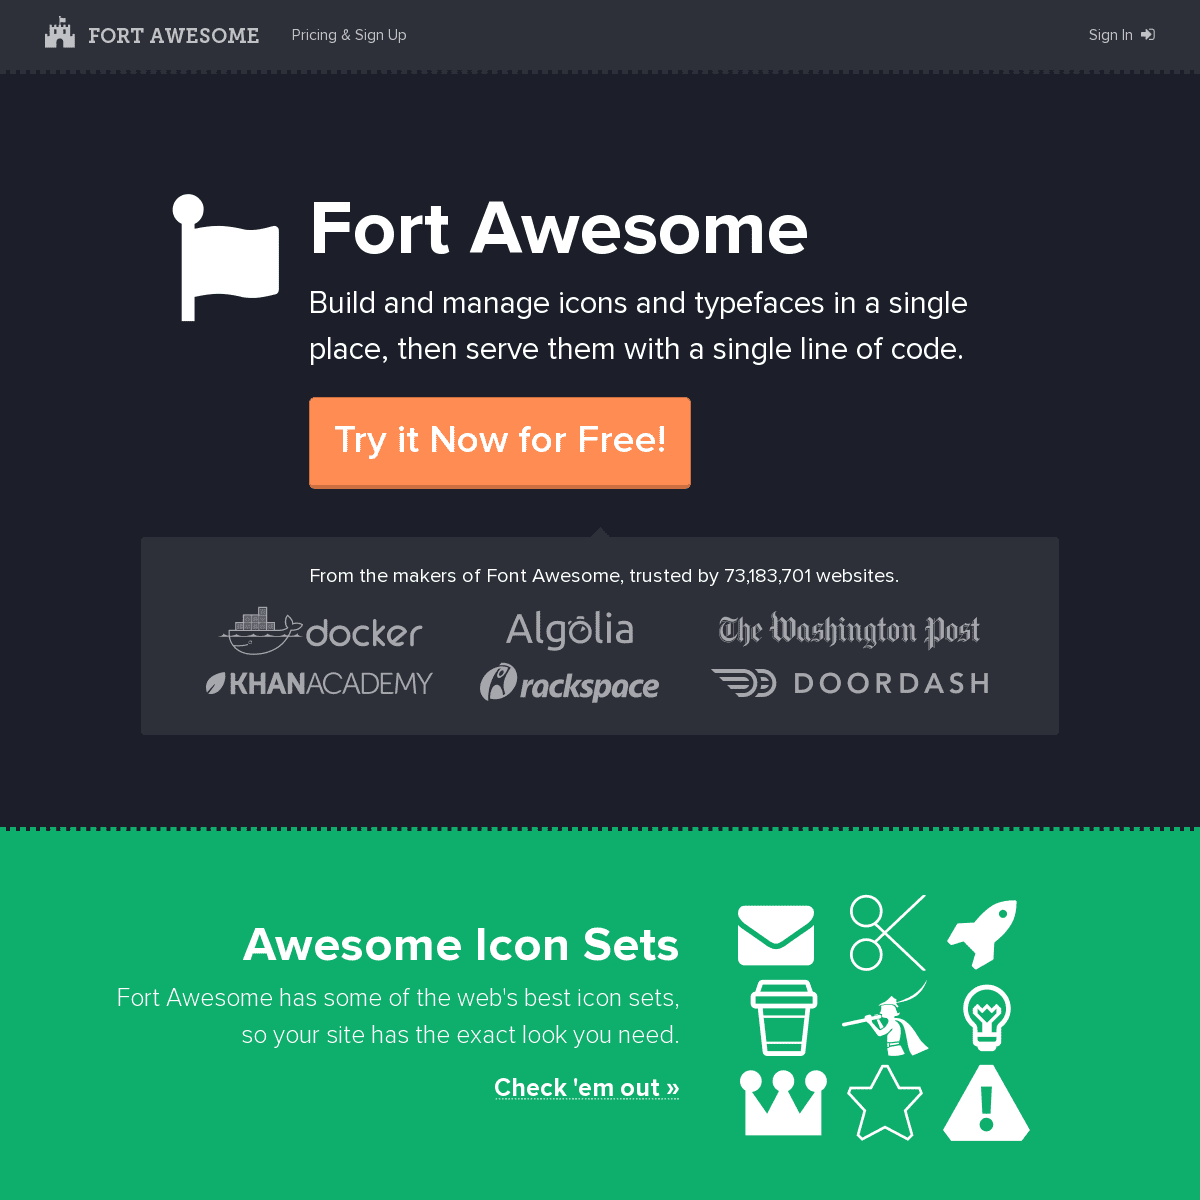 A complete backup of fortawesome.com